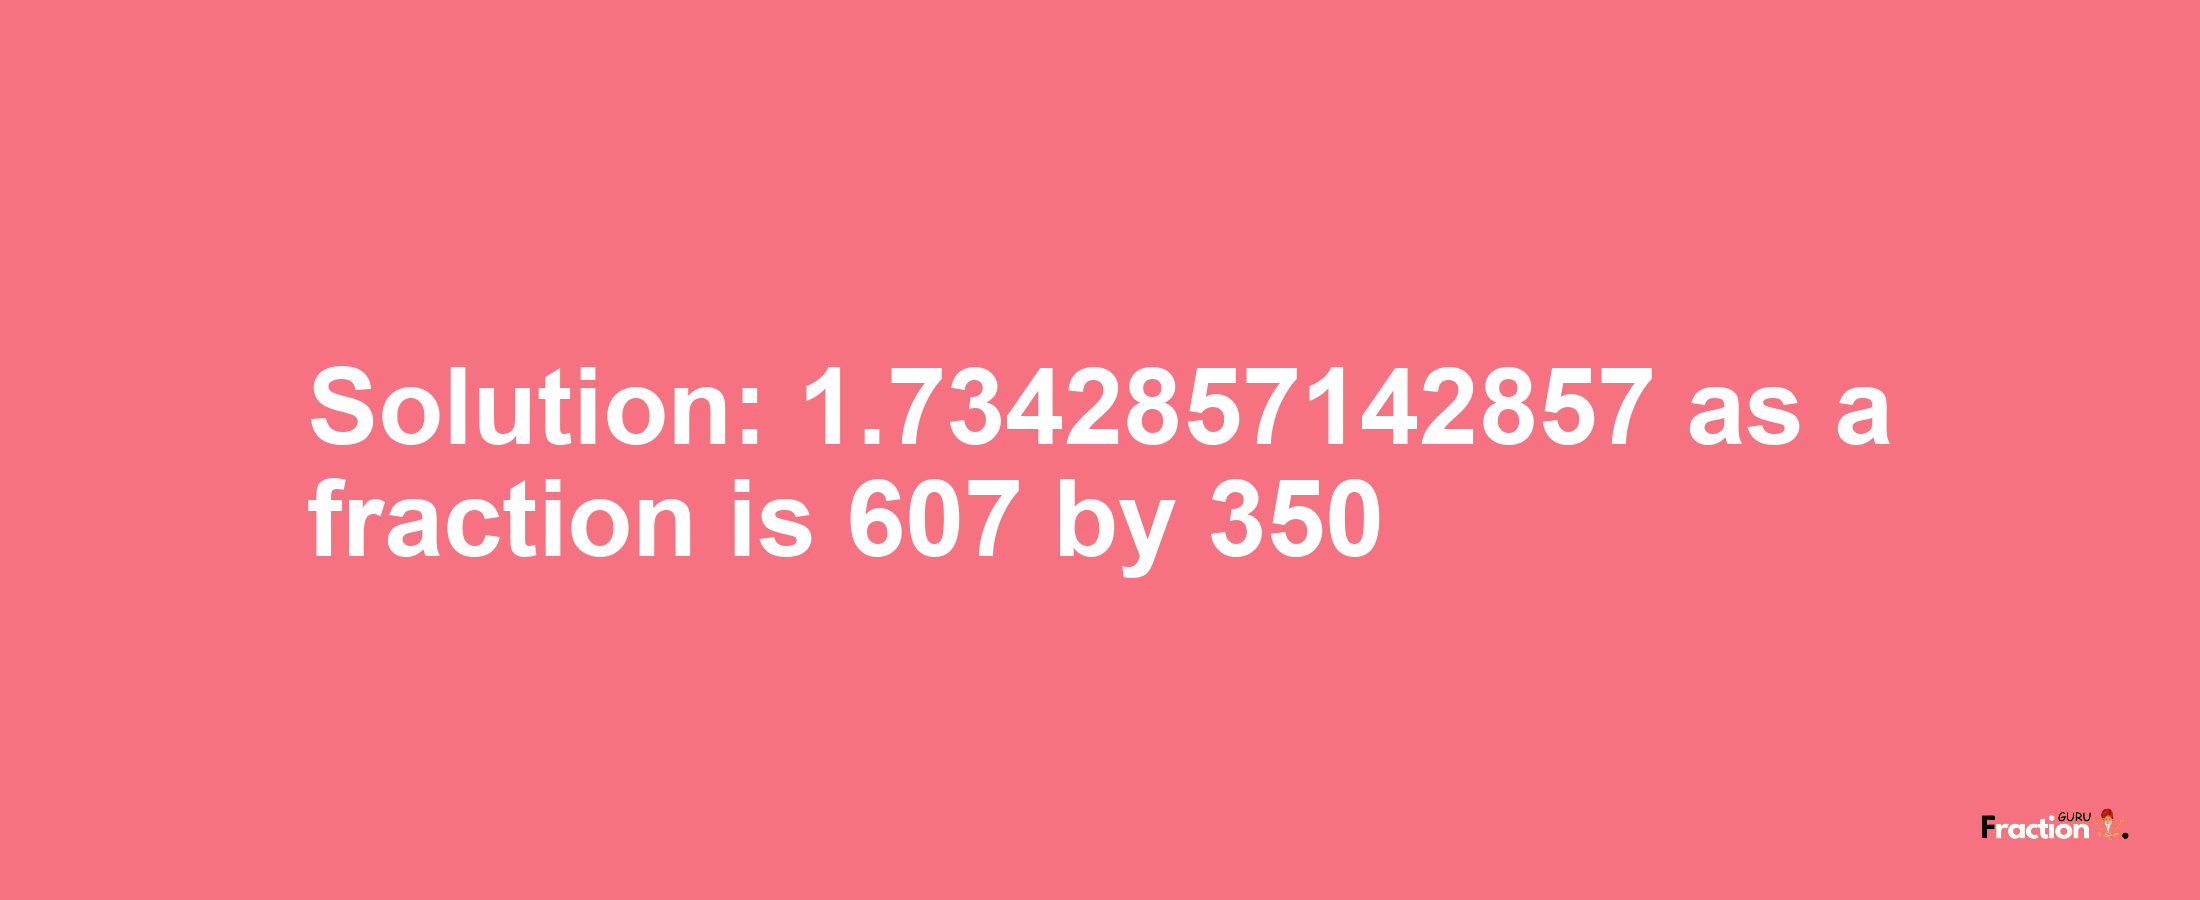 Solution:1.7342857142857 as a fraction is 607/350